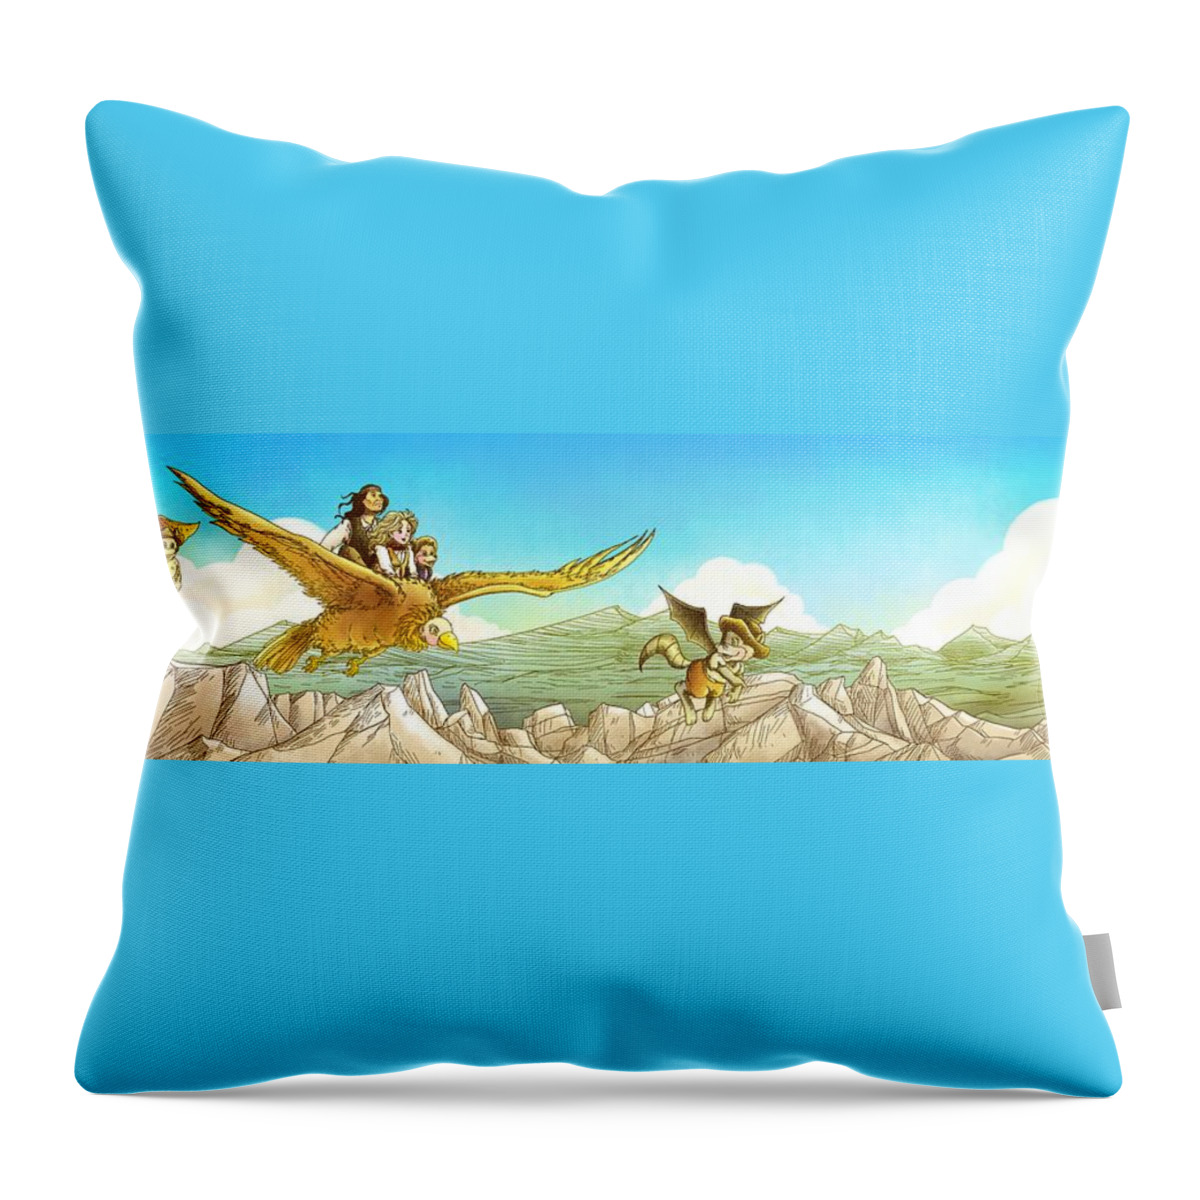  Wild West Throw Pillow featuring the painting Chiricahua Mountains Panorama by Reynold Jay